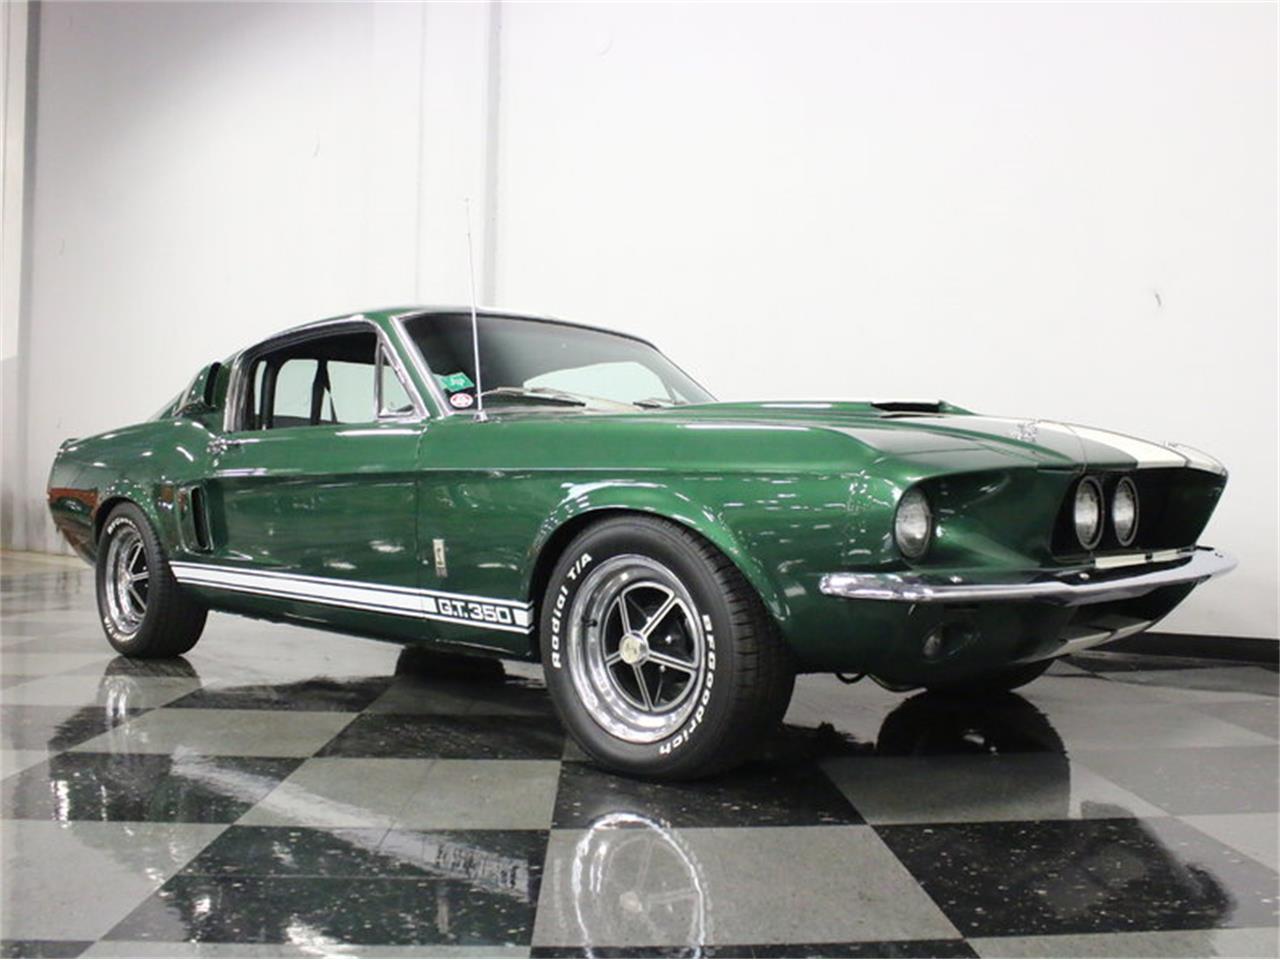 1967 Ford Mustang Shelby GT350 Supercharged for Sale | ClassicCars.com